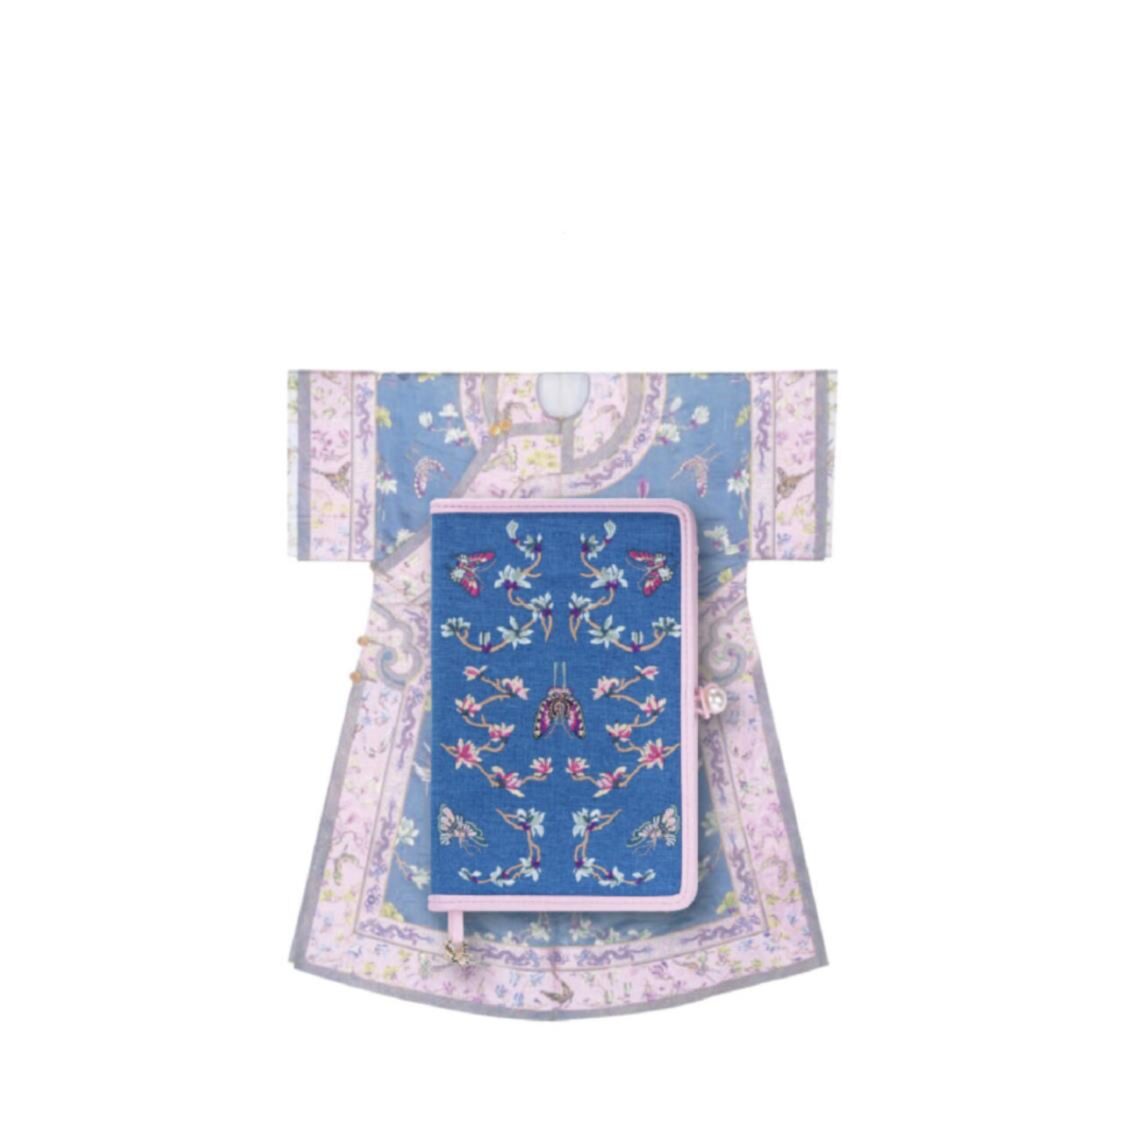 Xuan Culture  Lifestyle Butterfly Inspired Motif Embroidery Organiser